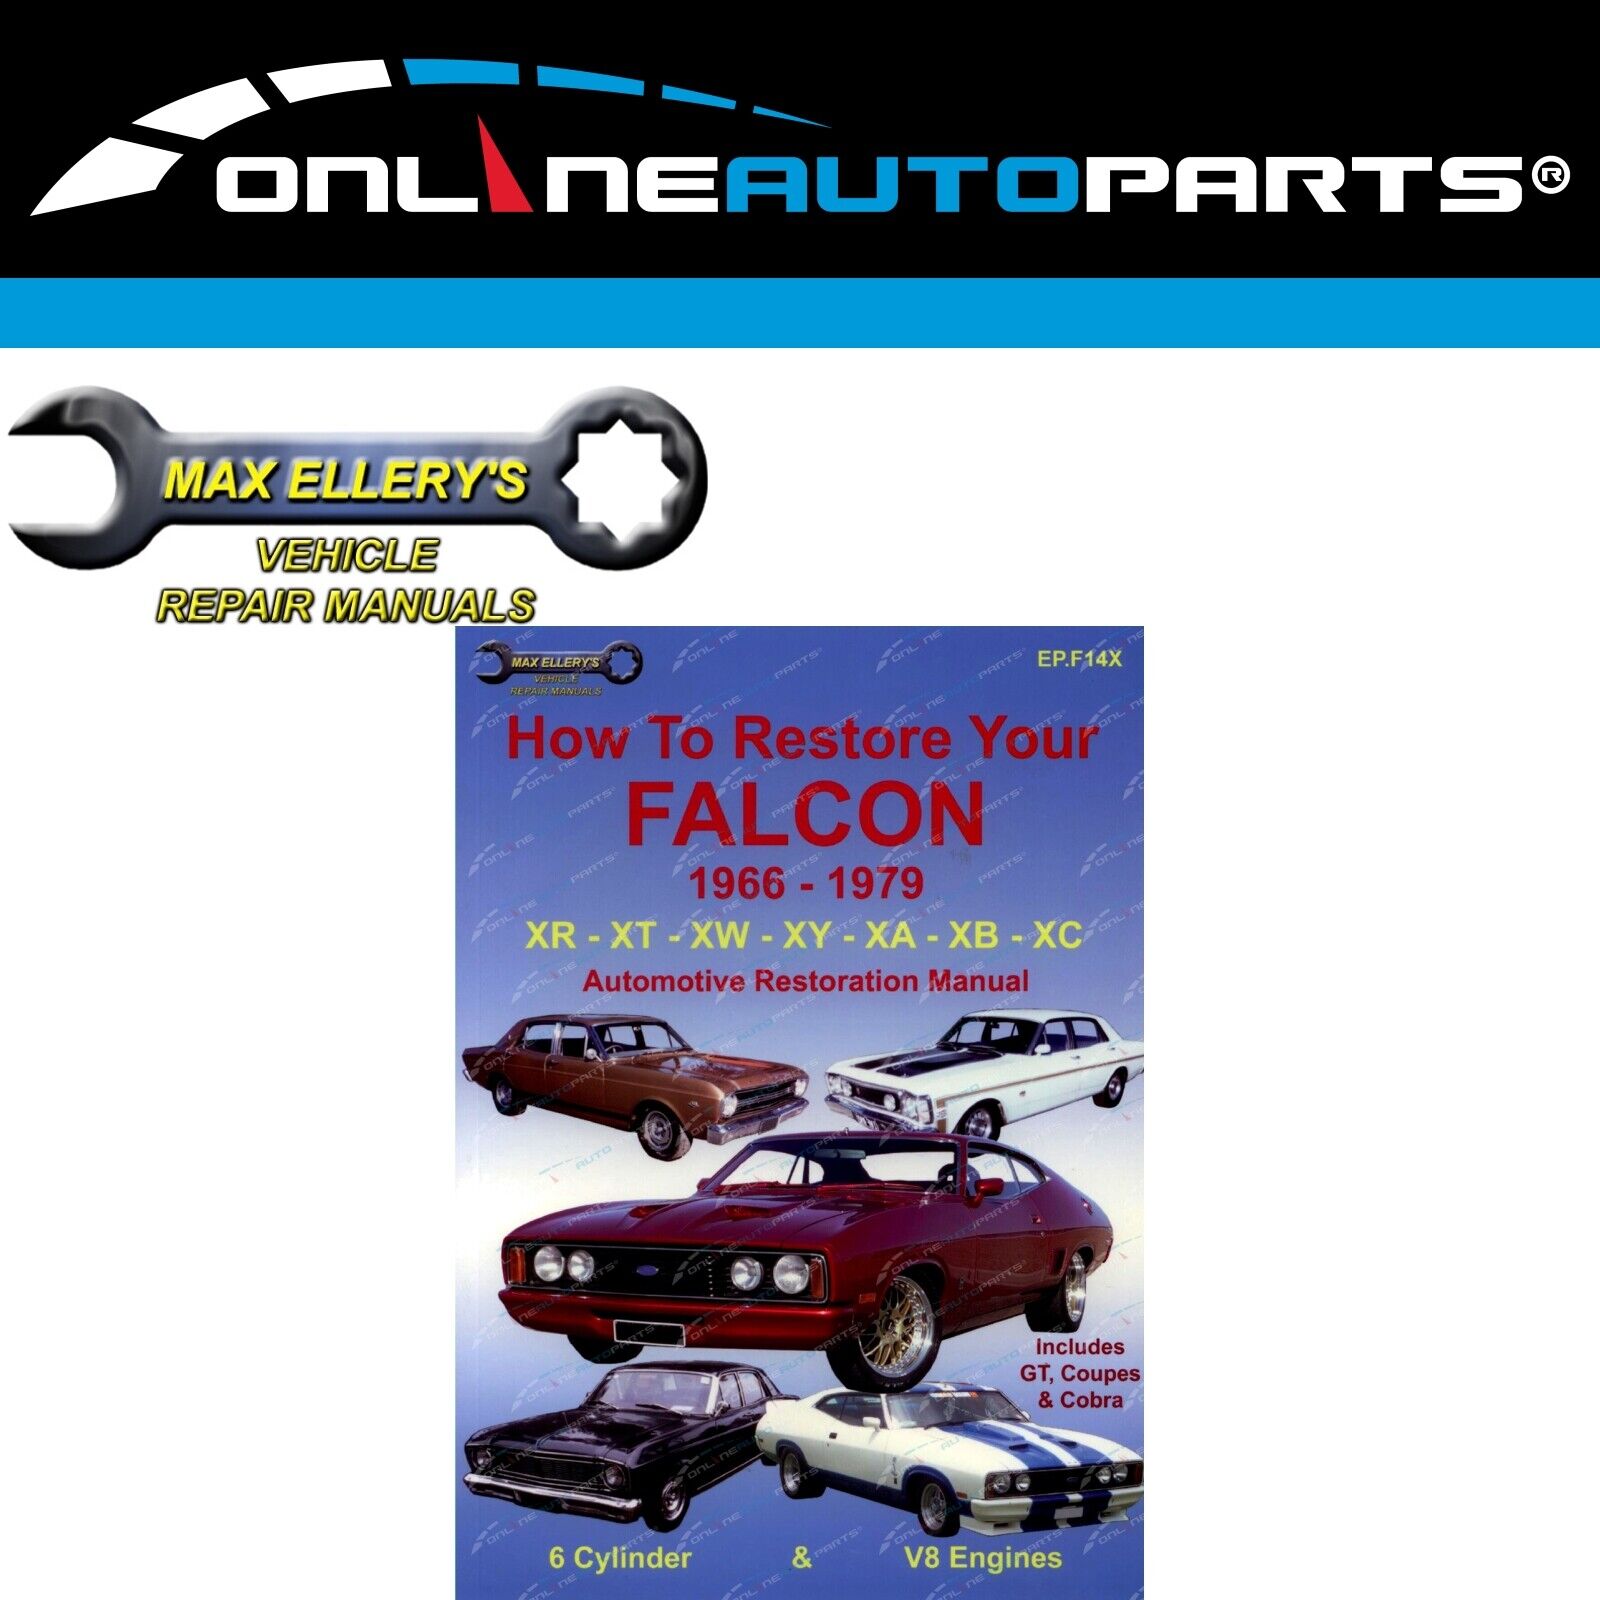 Restoration Manual Book for Falcon XR XT XW XY XA XB XC How to Restore your Ford